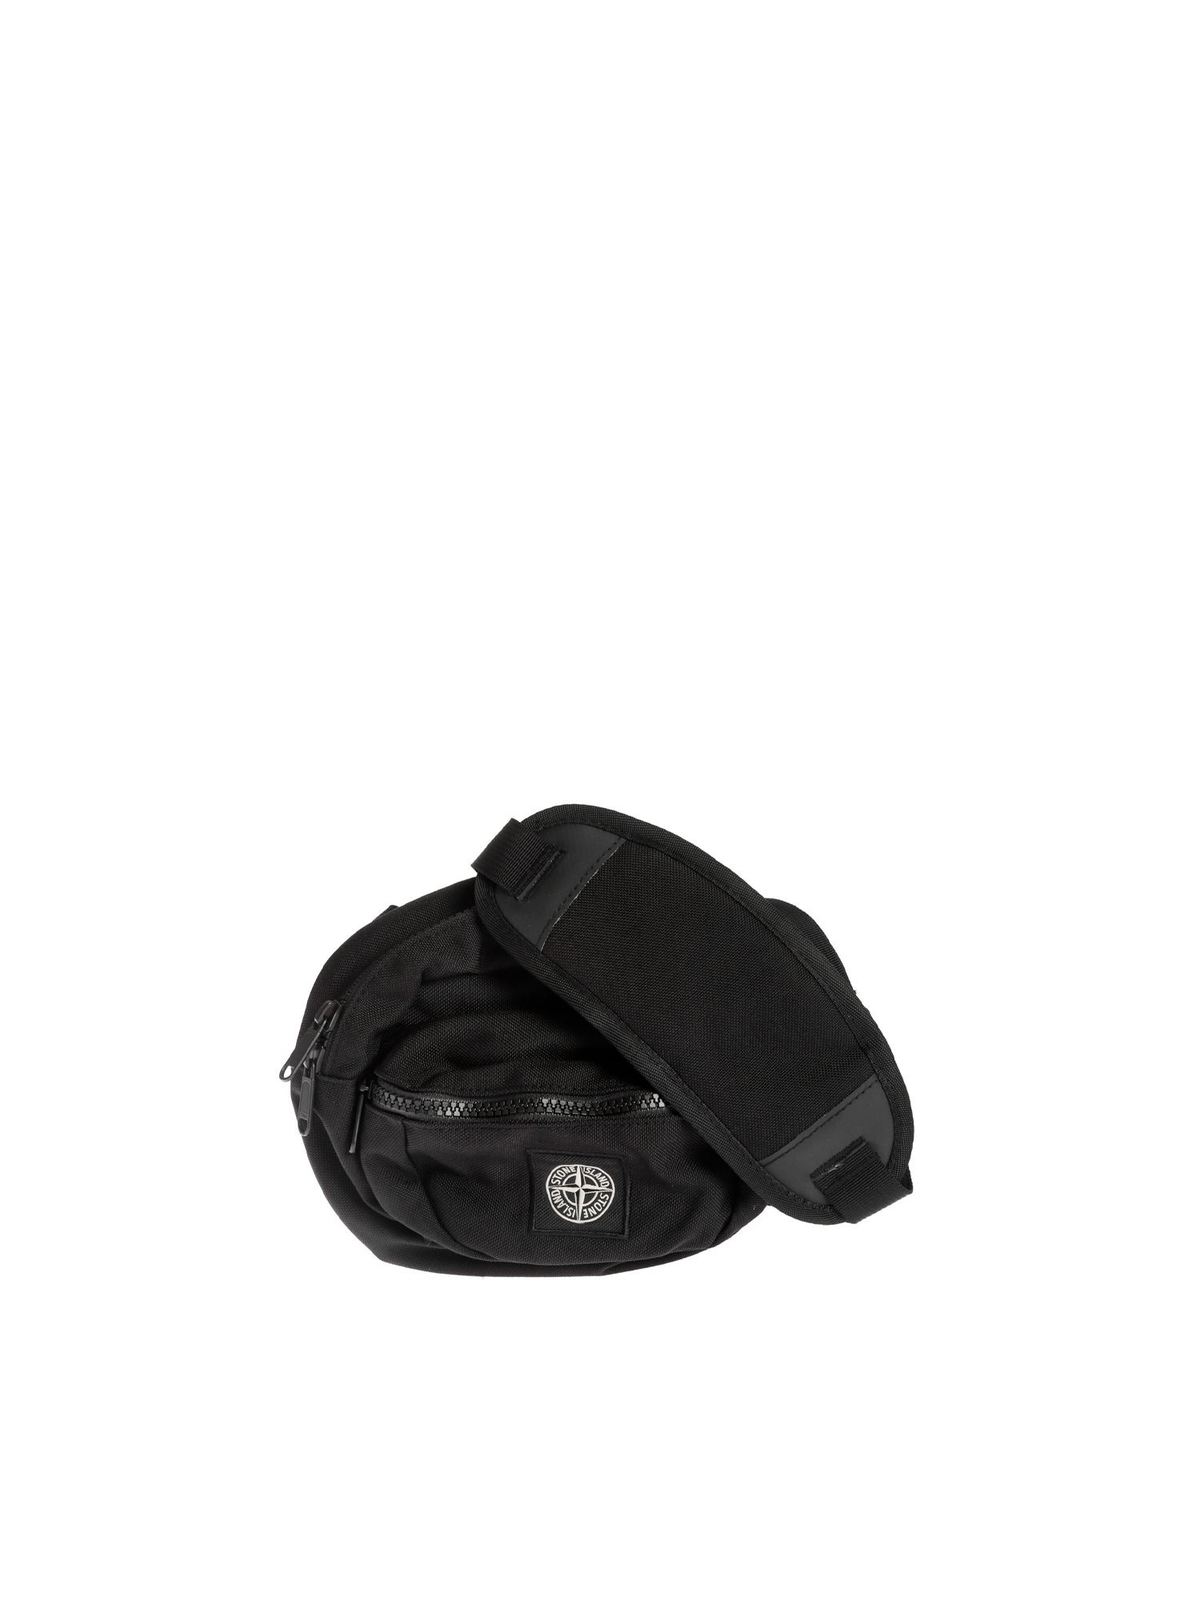 STONE ISLAND BELT BAG IN BLACK WITH HARNESS